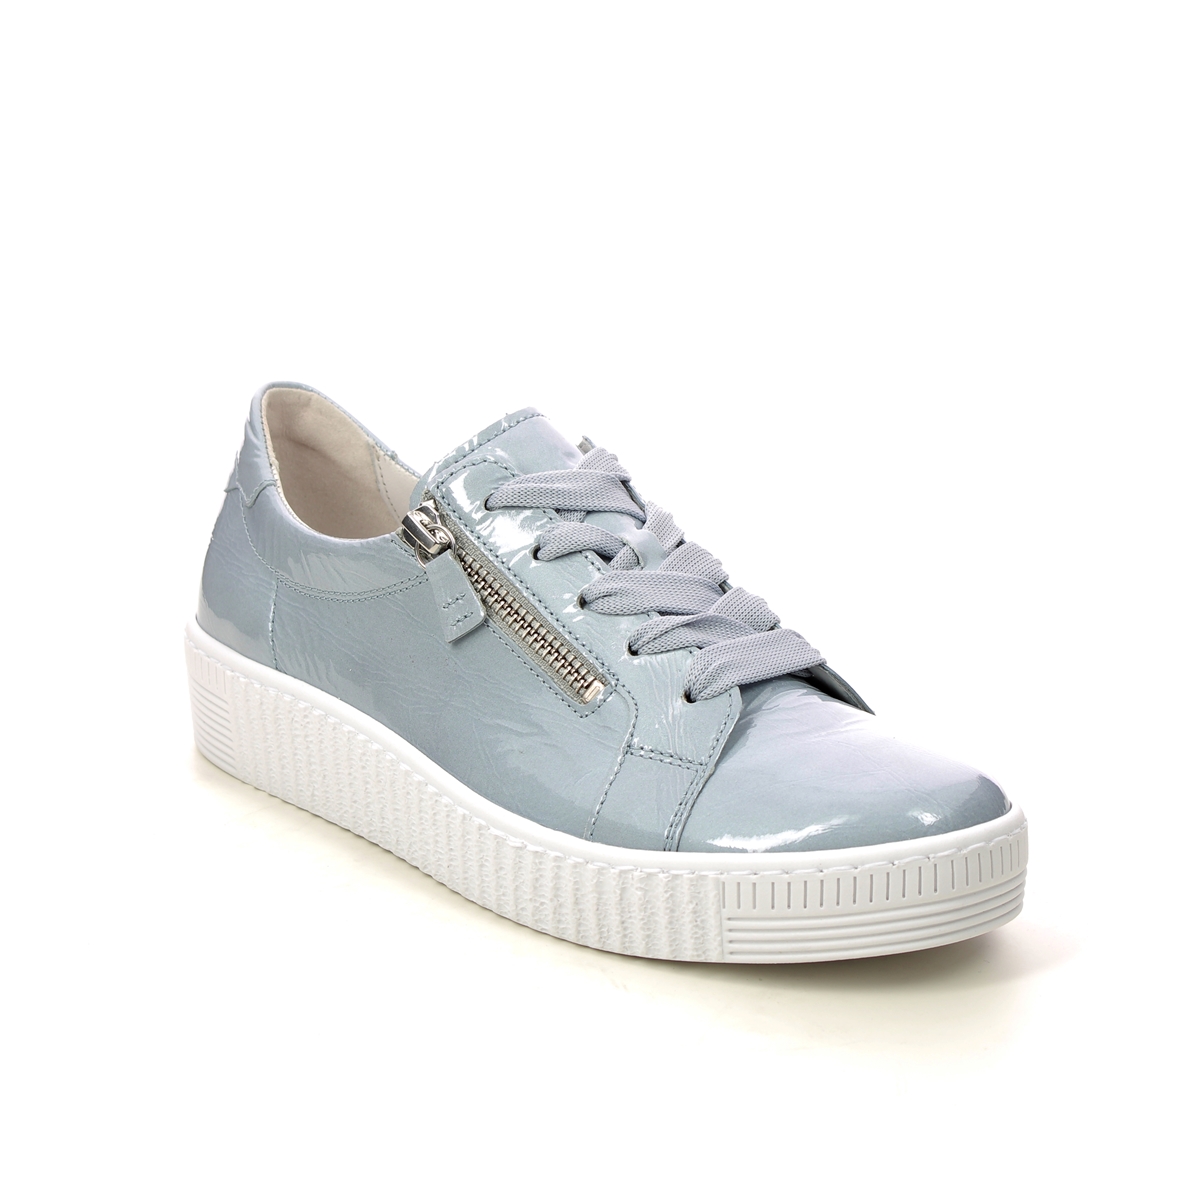 Gabor Wisdom BLUE LEATHER Womens trainers 23.334.96 in a Plain Leather in Size 4.5